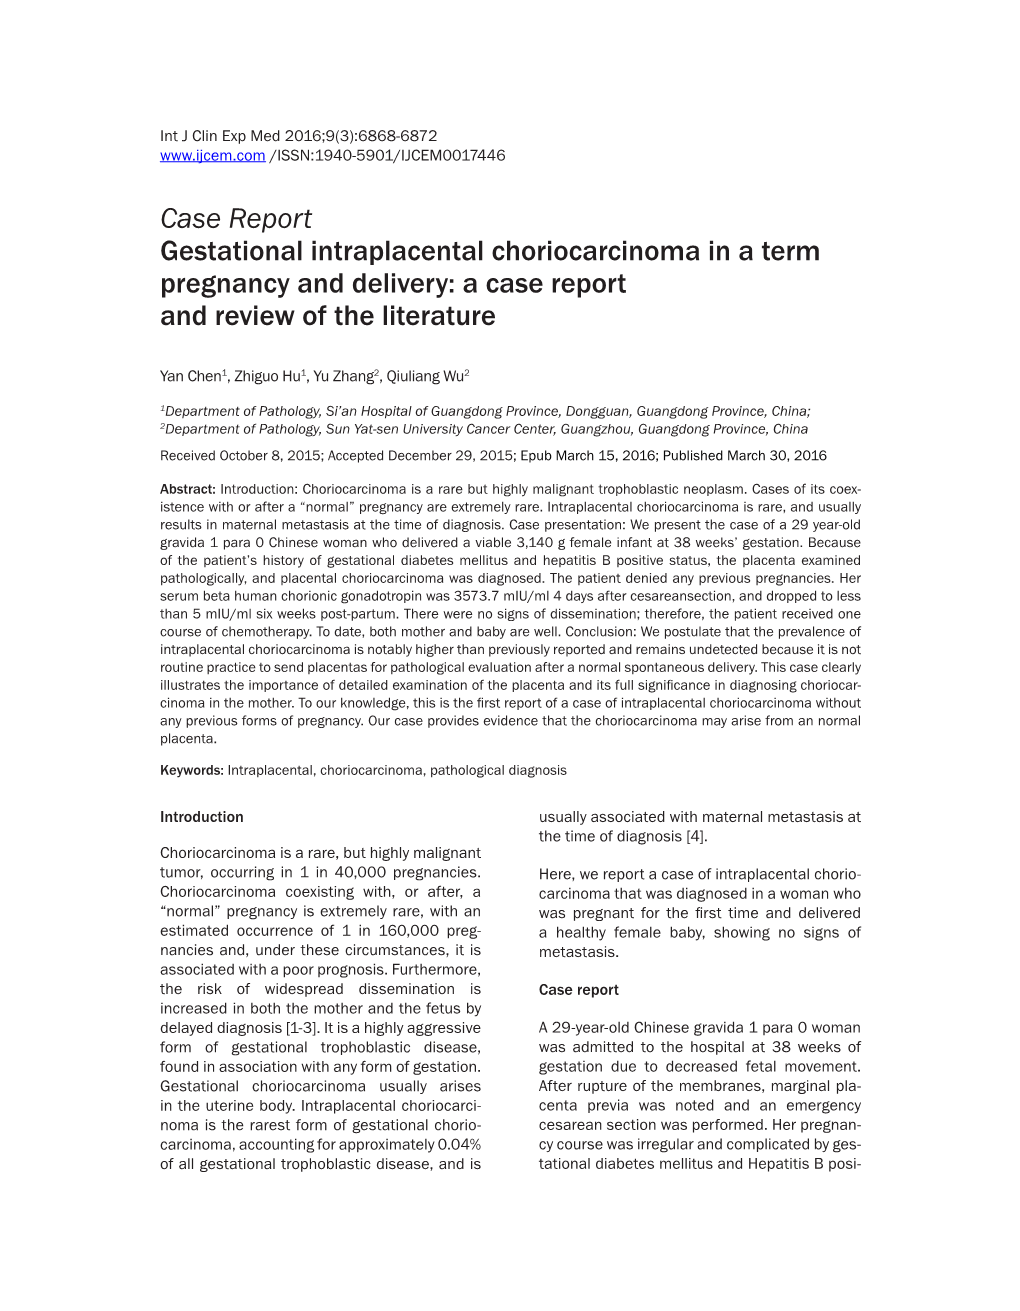 Case Report Gestational Intraplacental Choriocarcinoma in a Term Pregnancy and Delivery: a Case Report and Review of the Literature